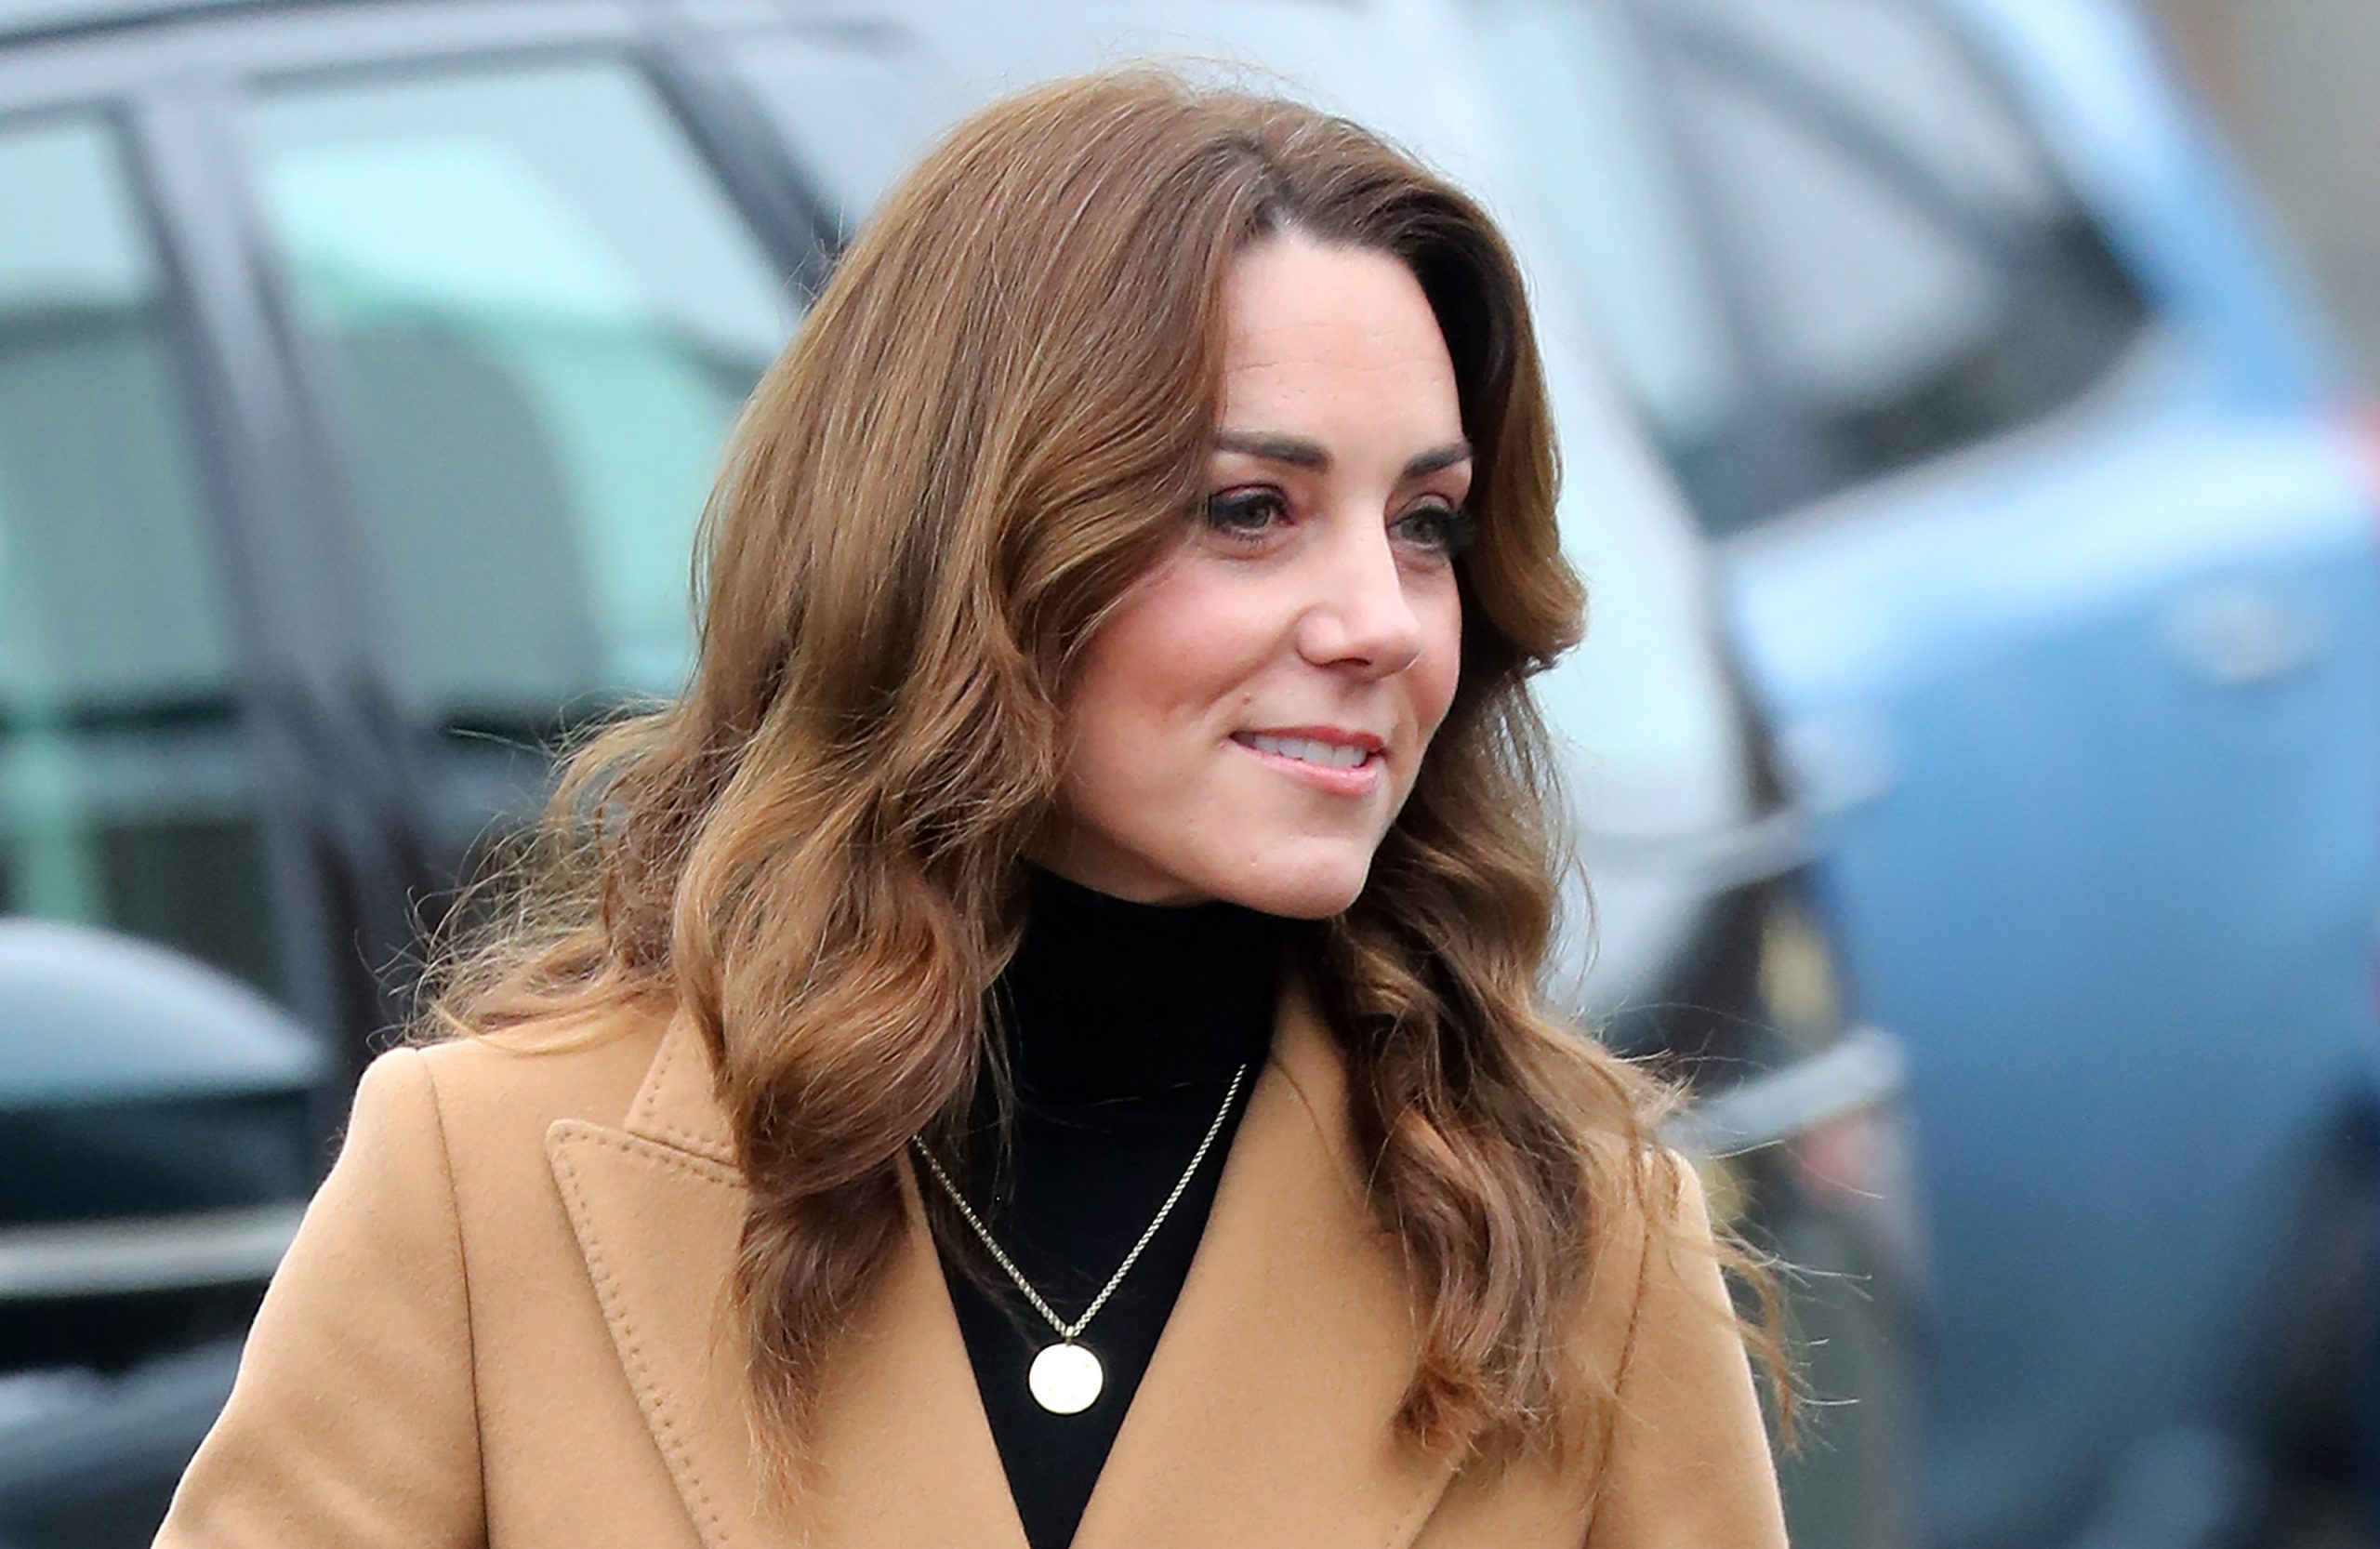 Kensington Palace shares behind the scenes pictures of Kate Middleton ...